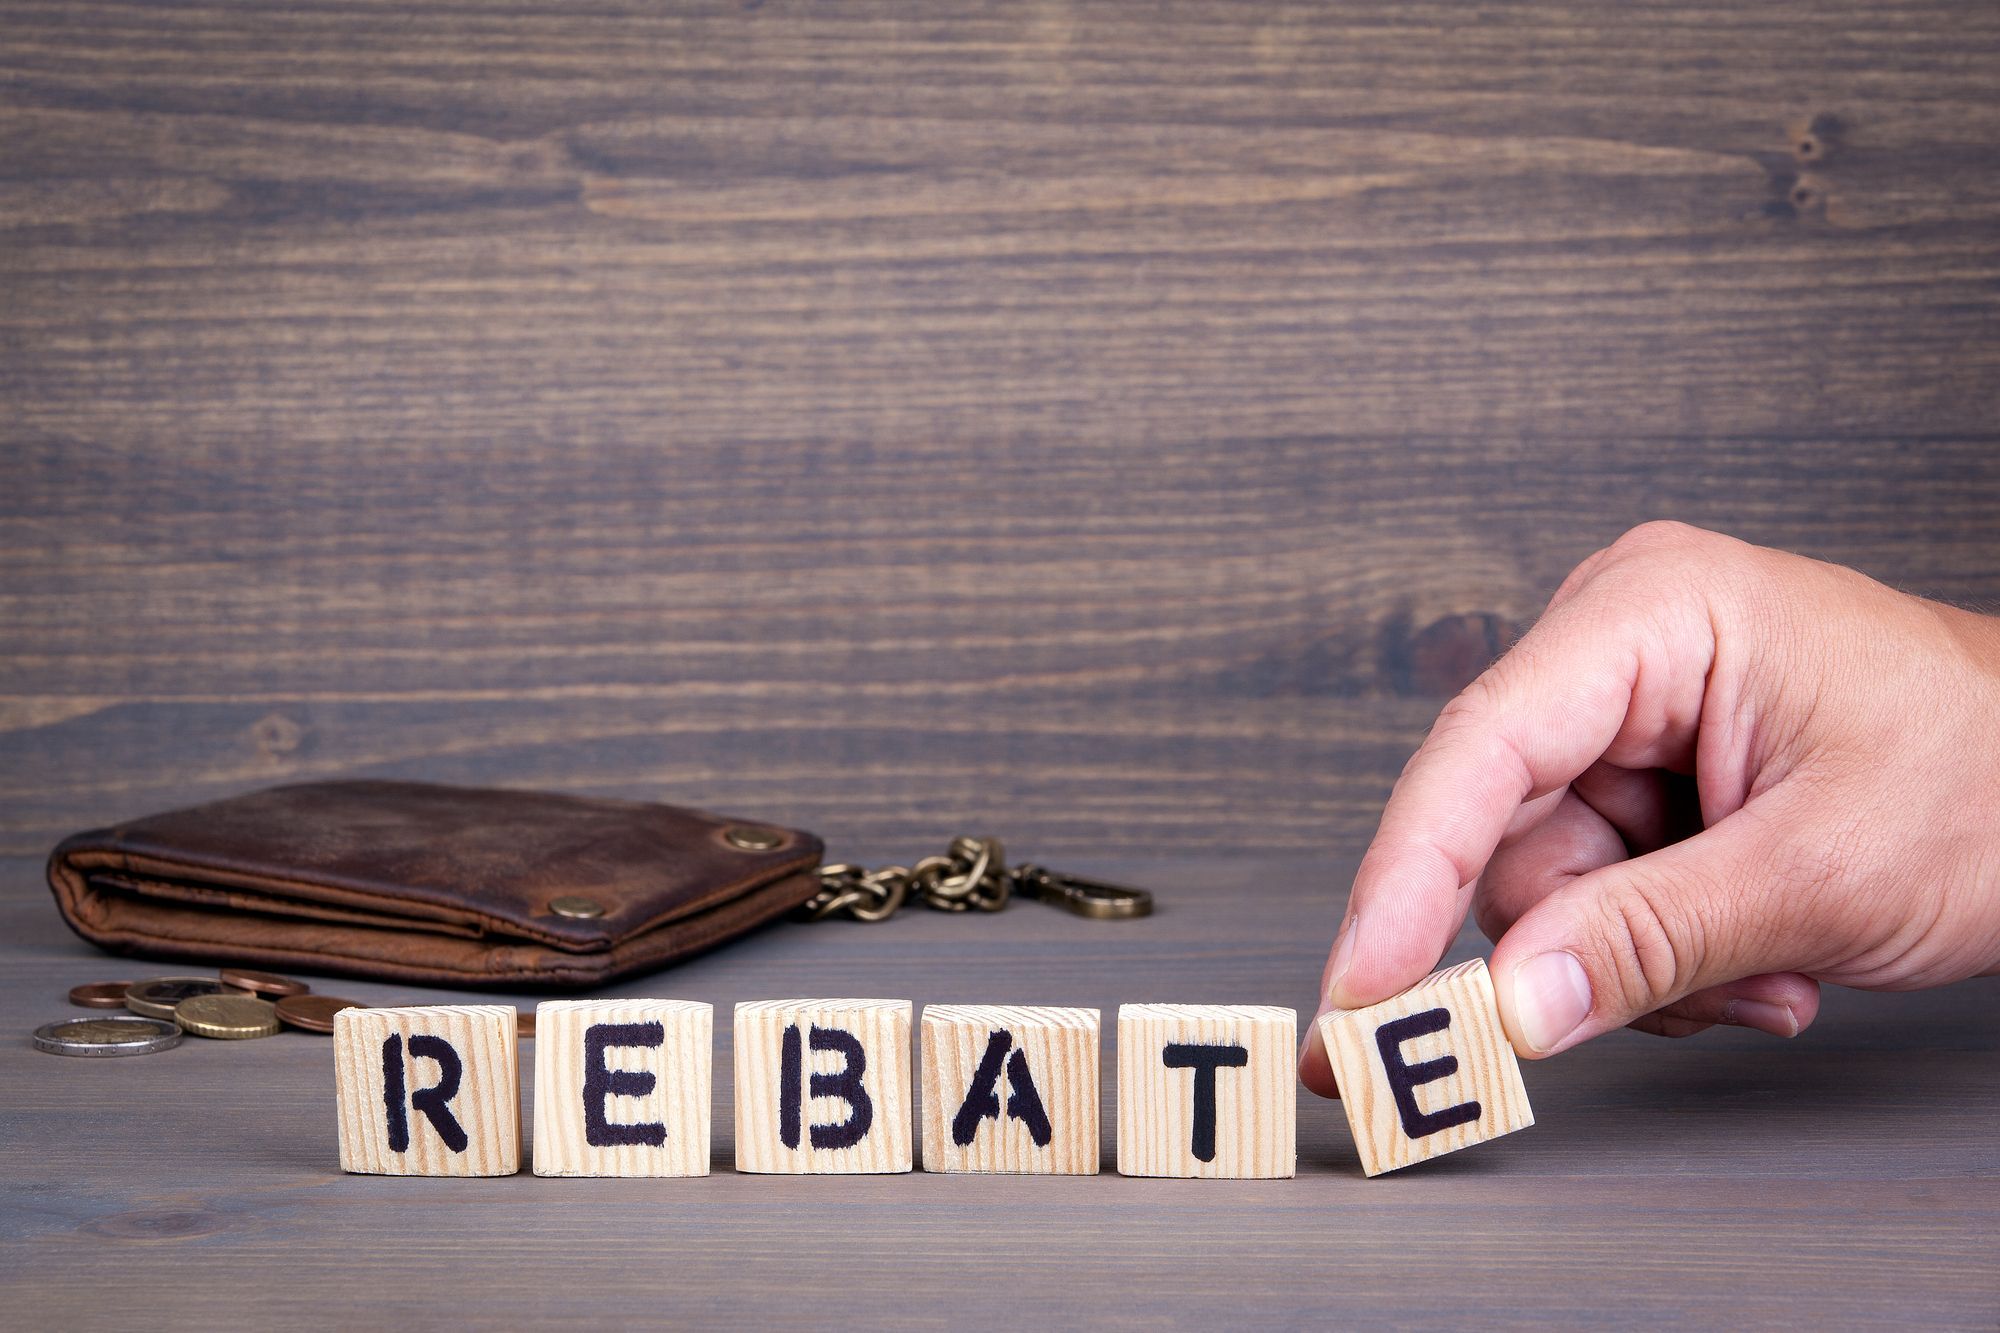 Rebate spelled out with blocks regarding information on what Canadian class action rebates are.